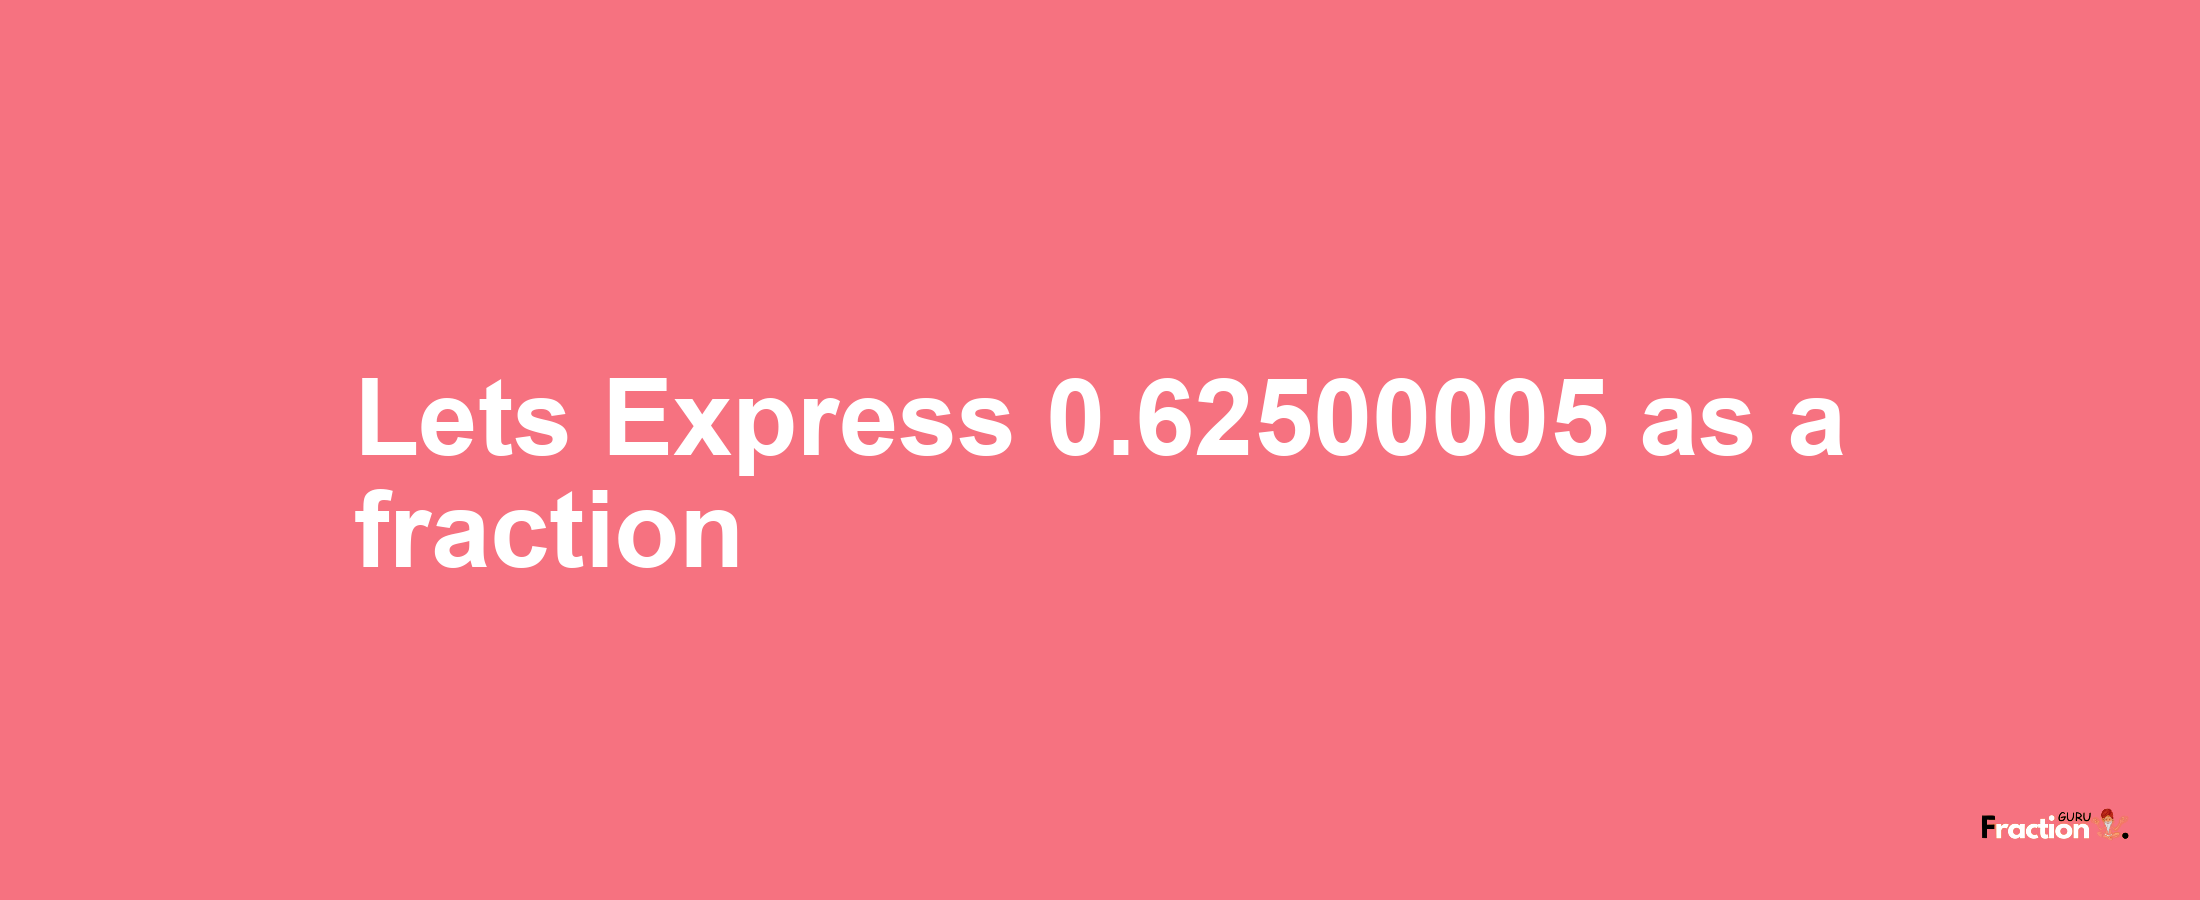 Lets Express 0.62500005 as afraction